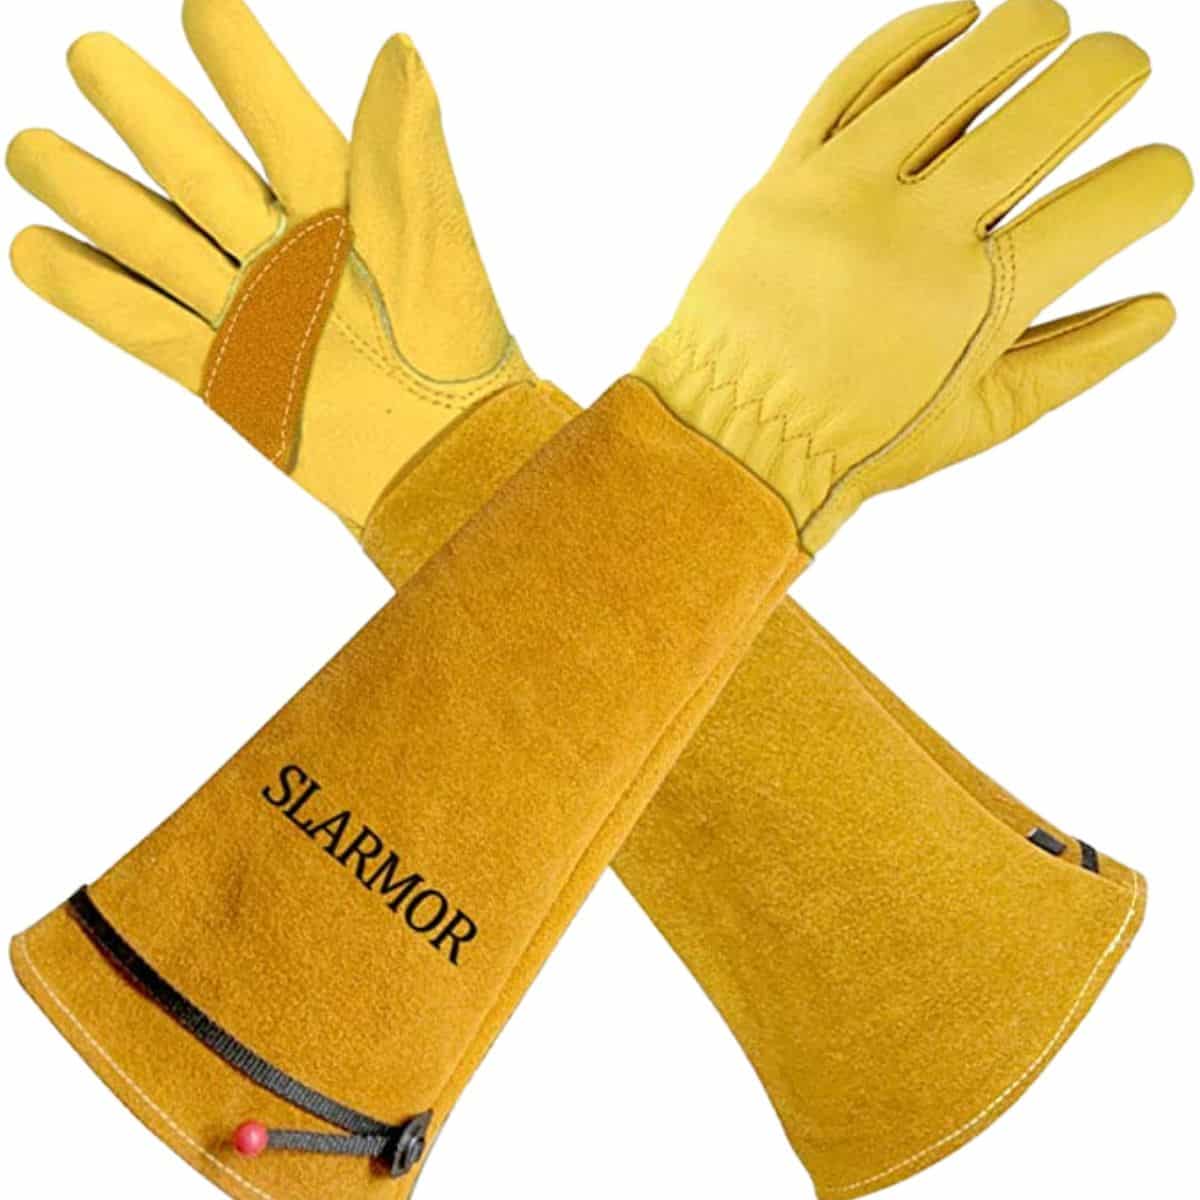 yellow leather cowhide glove full forearm coverage text on glove reads slarmor from Amazon